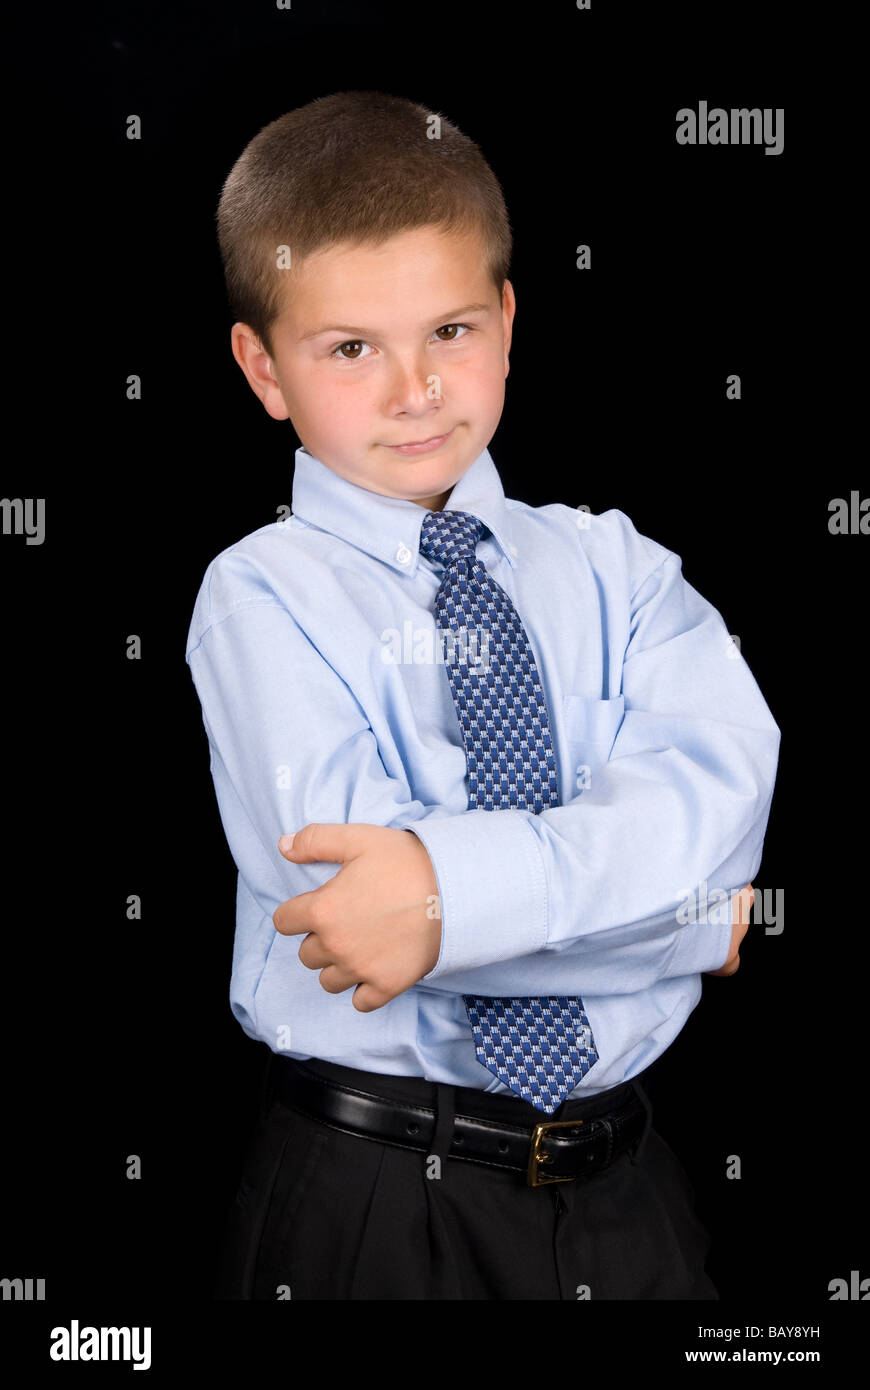 A young business boy in suit and tie giving some attitude Stock Photo